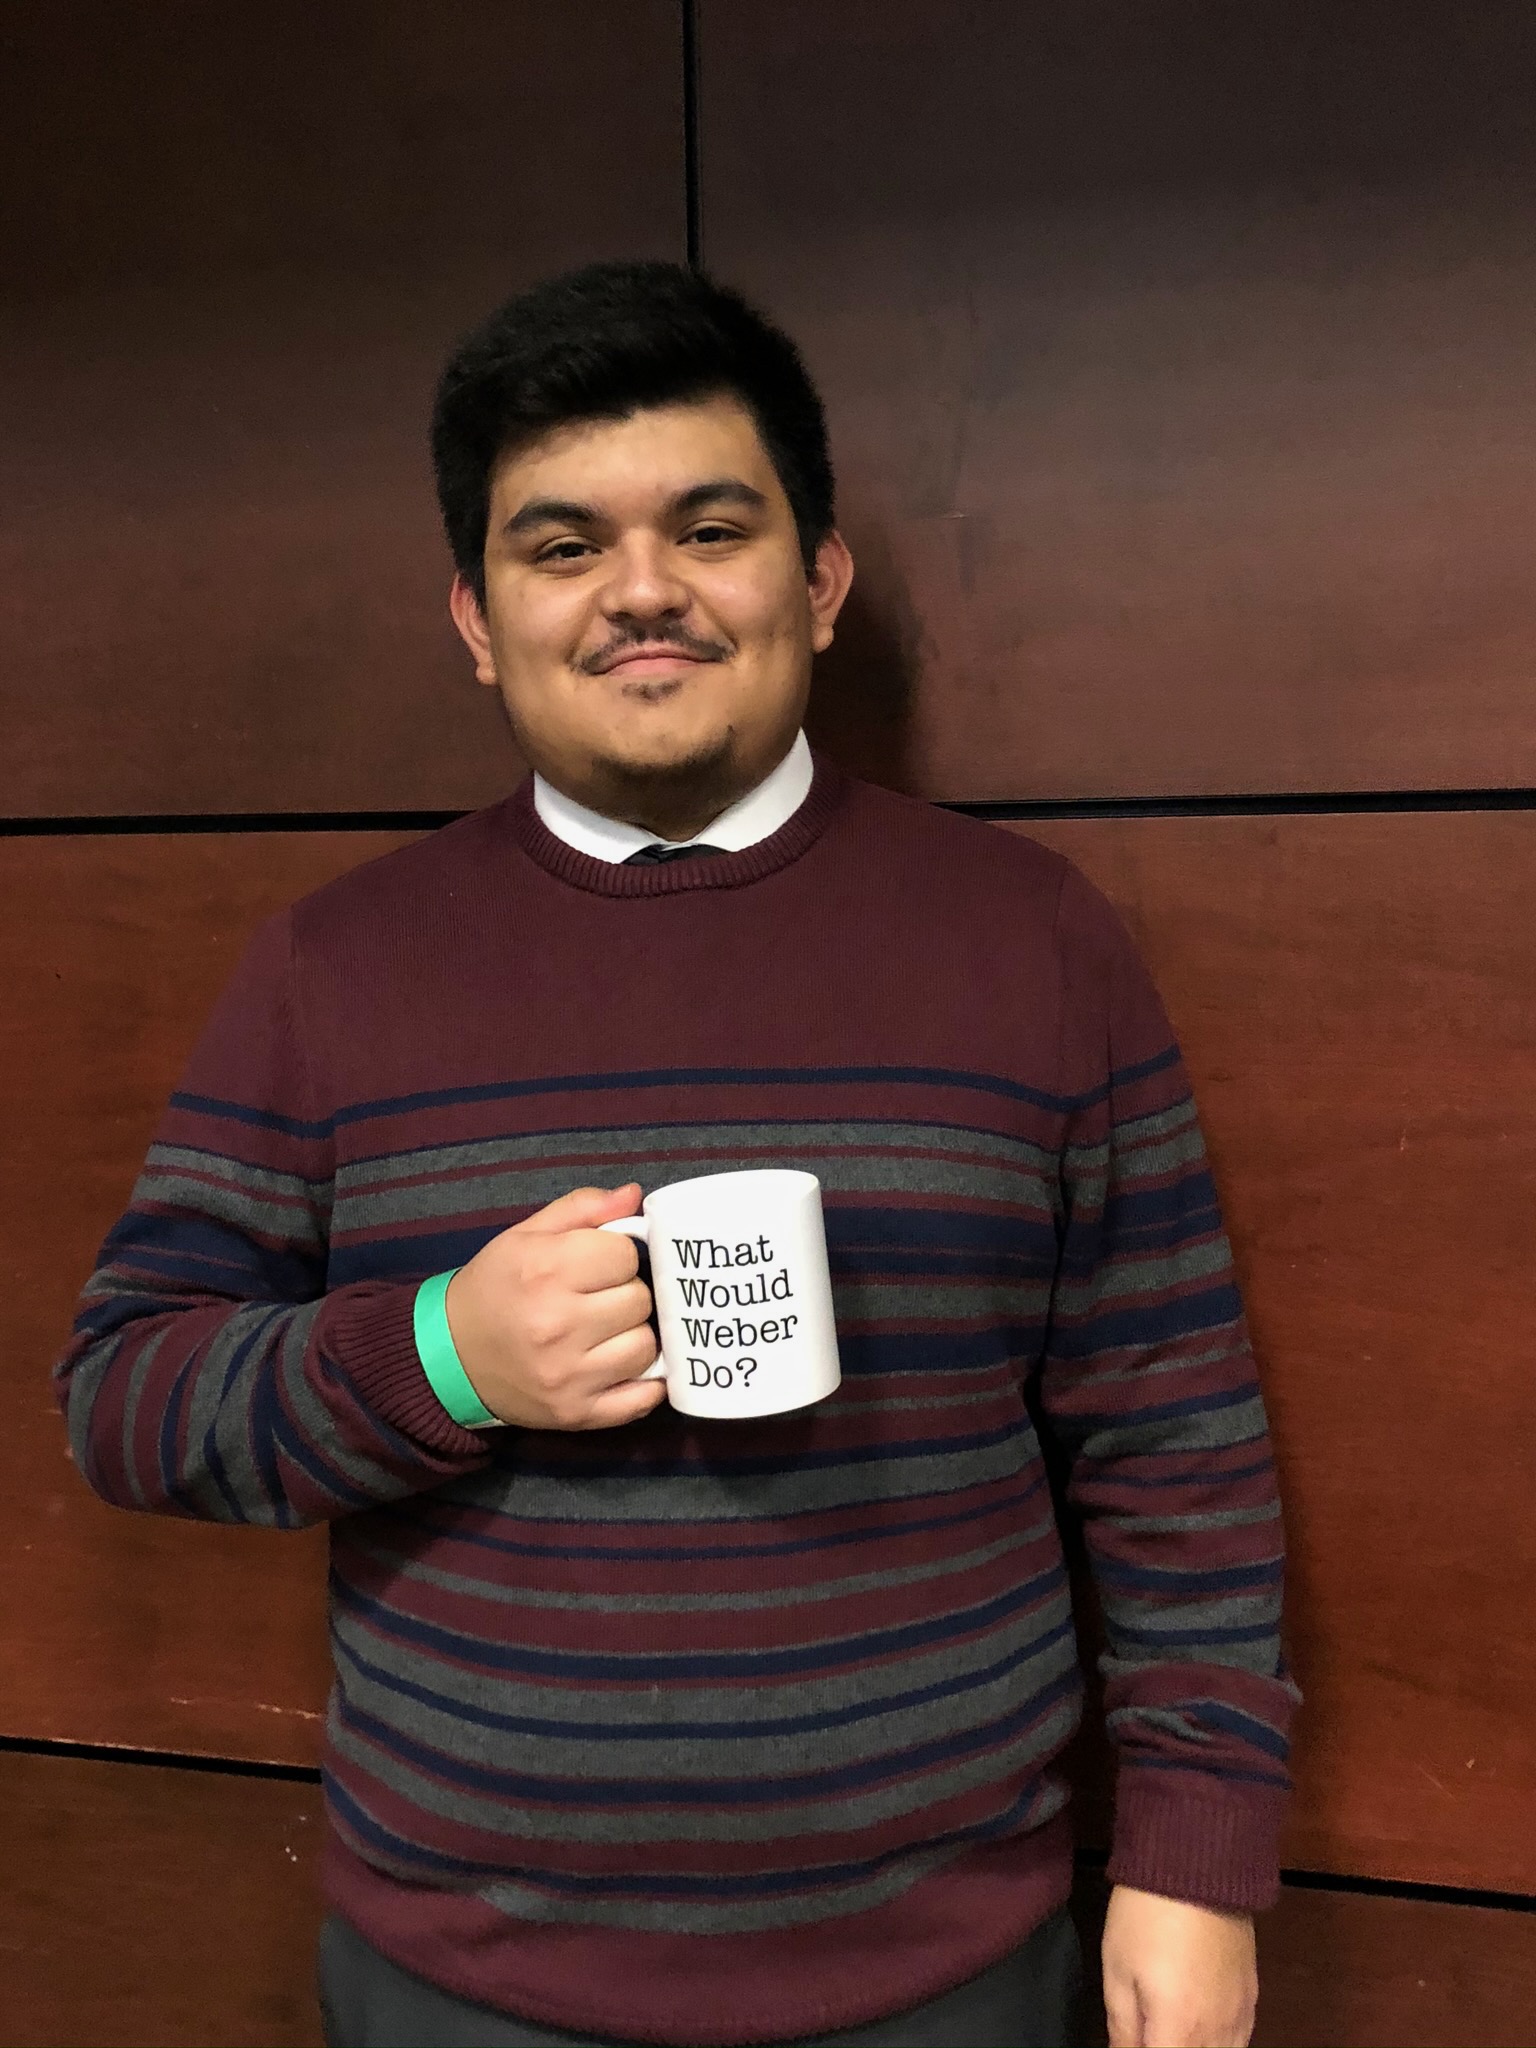 A student holding a mug that they won in a raffle.